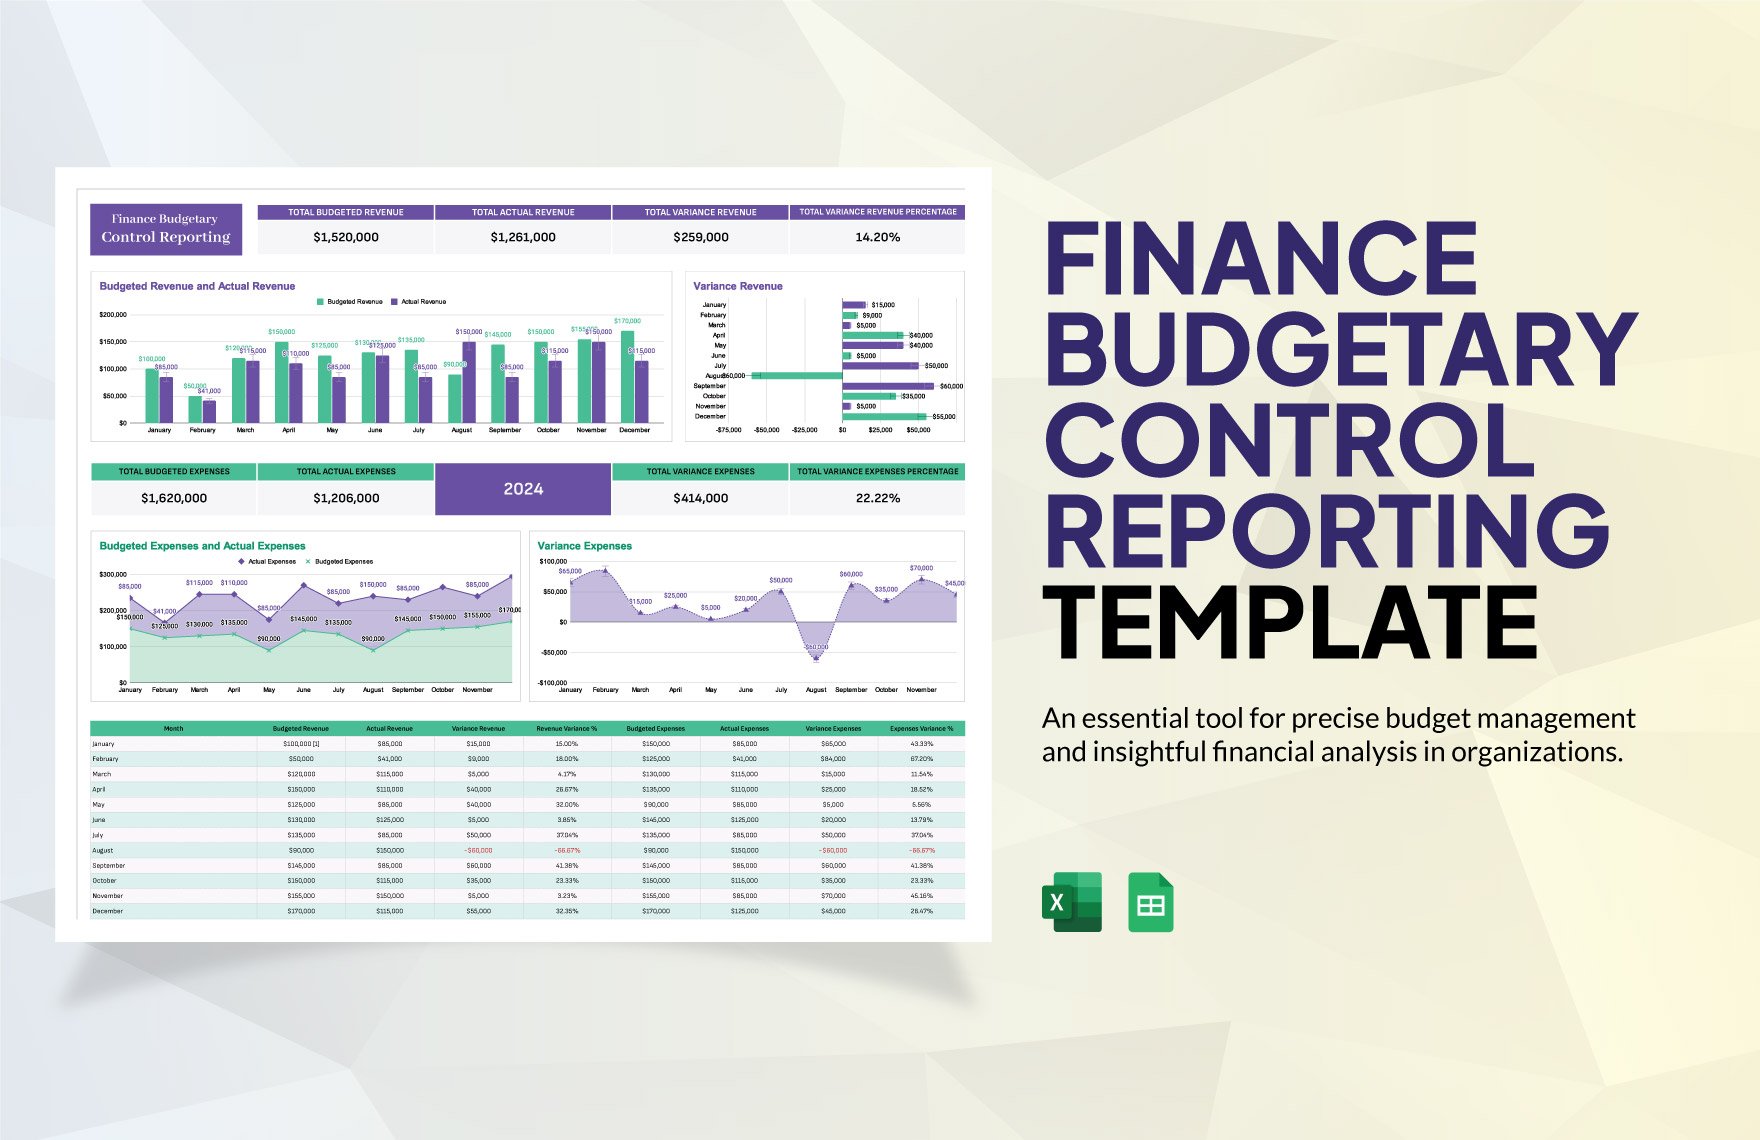 Finance Budgetary Control Reporting Template